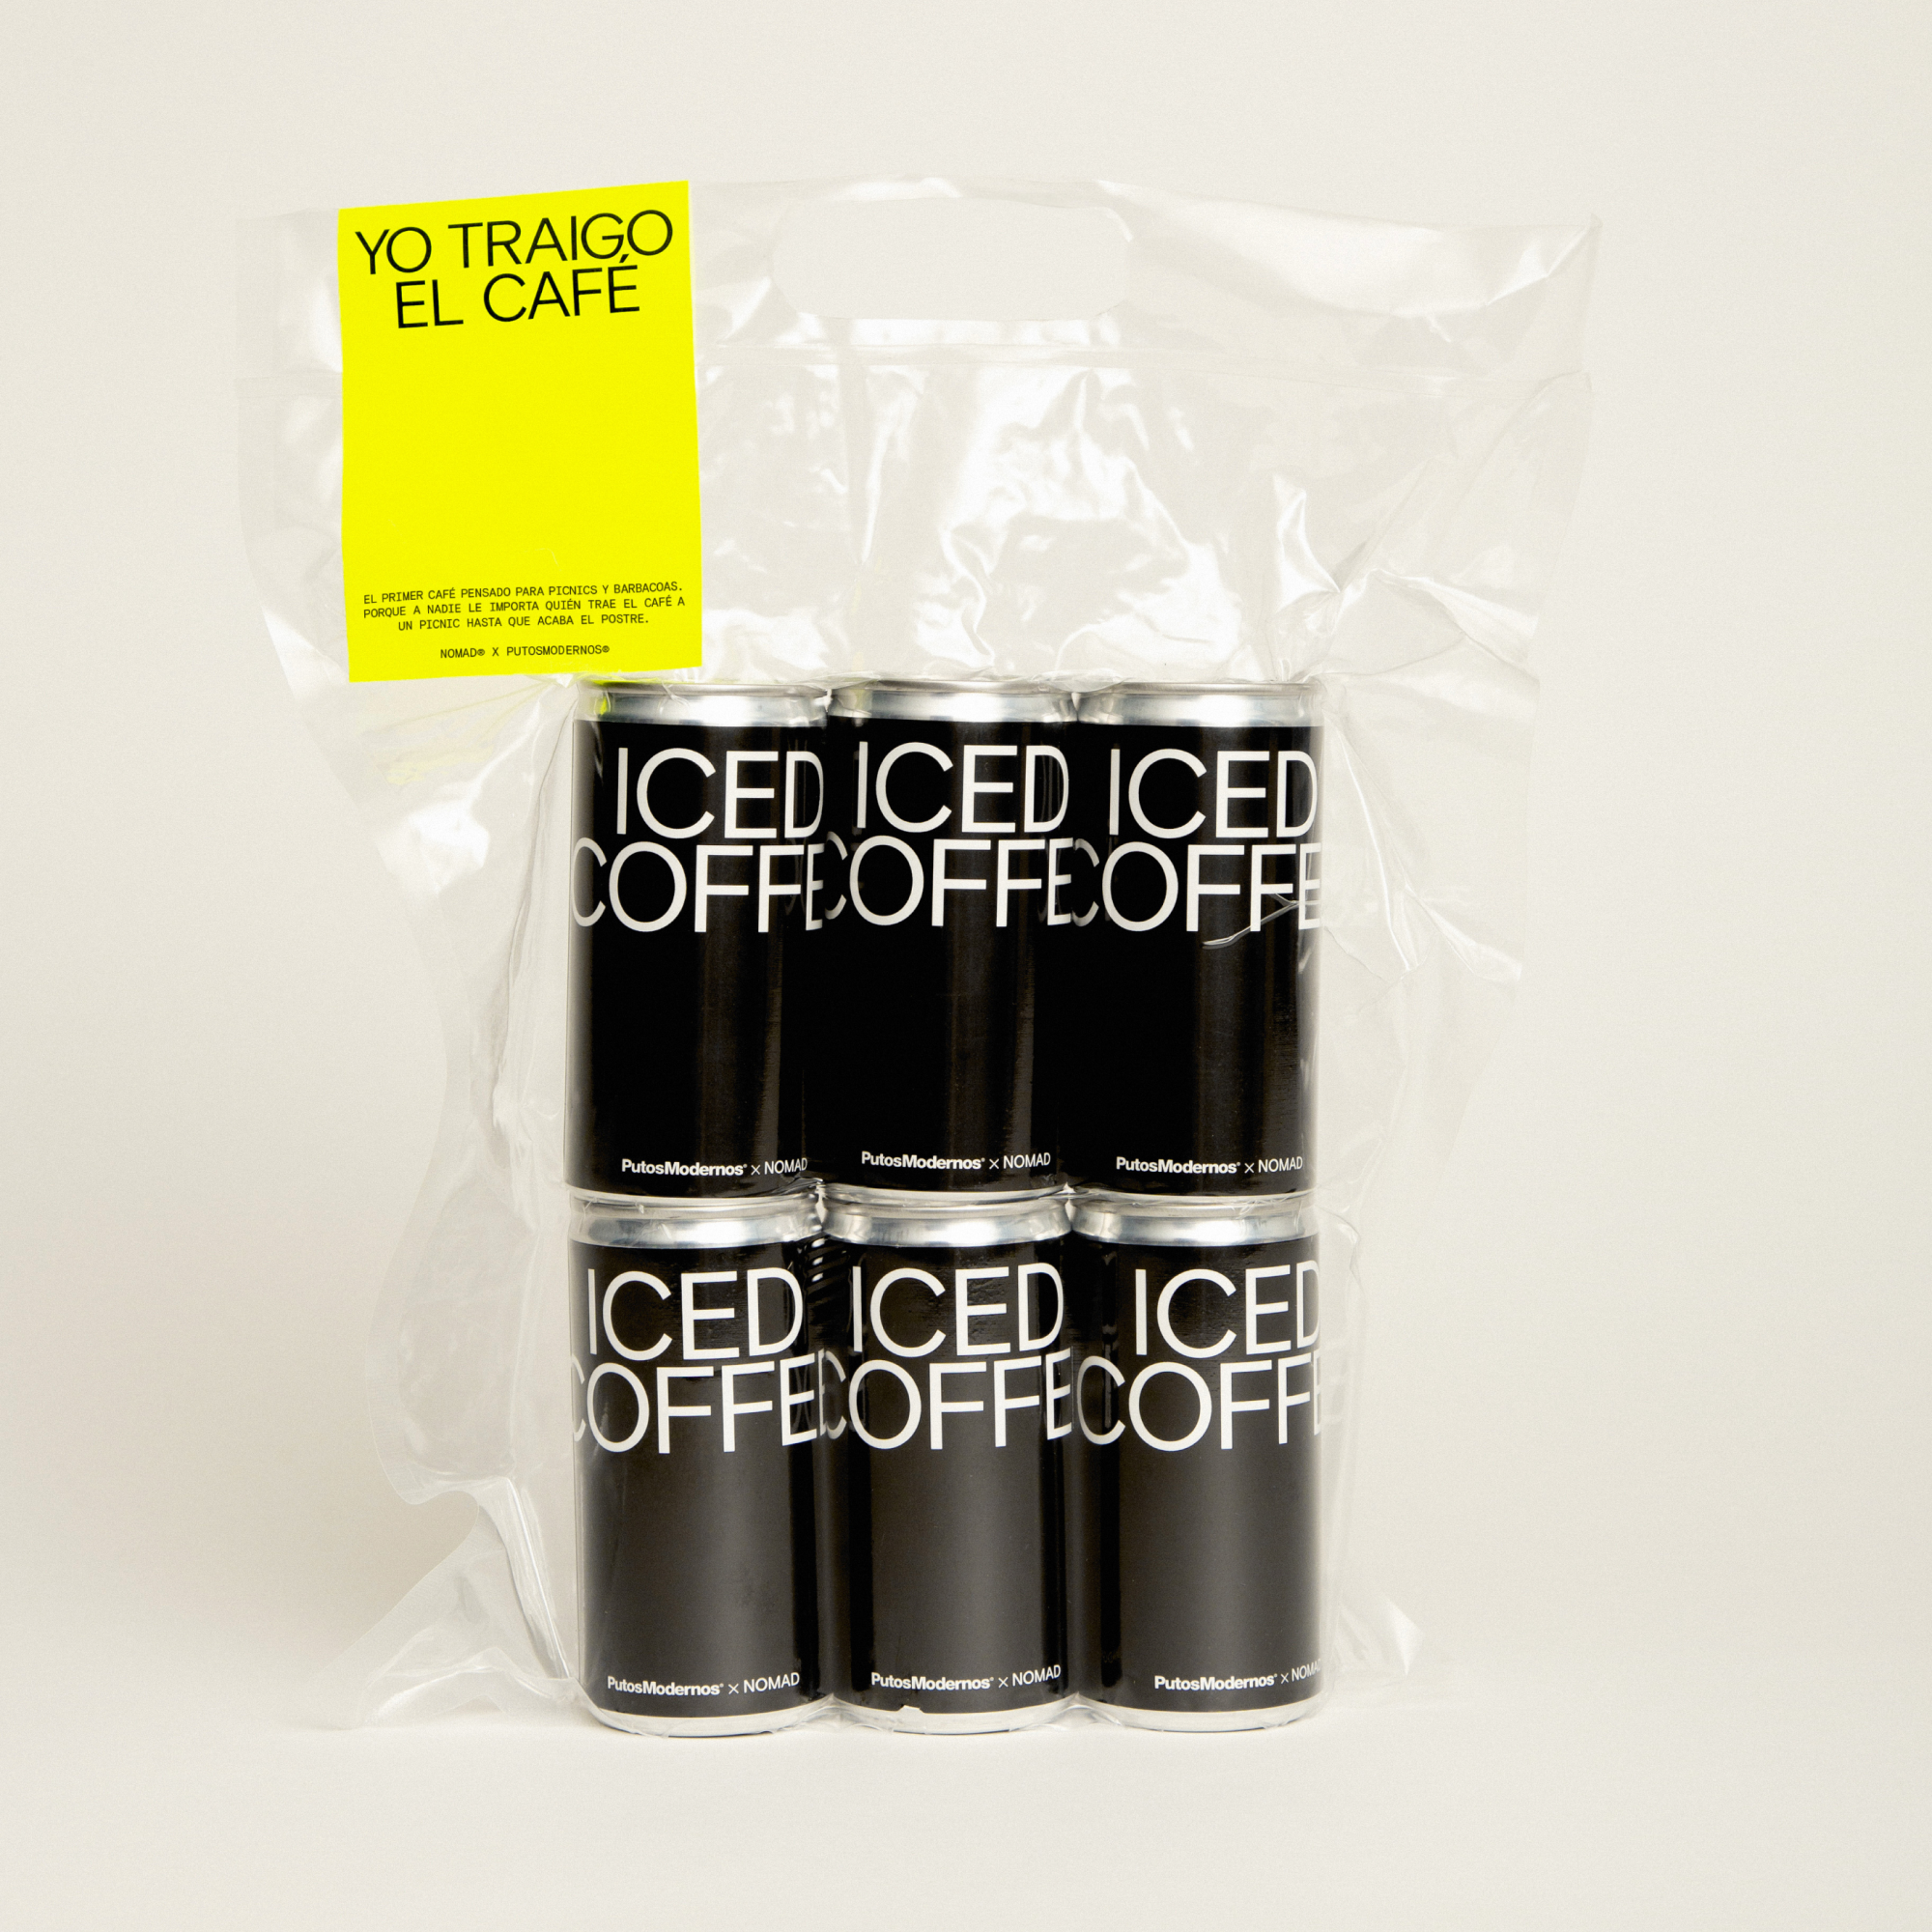 ICED COFFEE<br>6 PACK